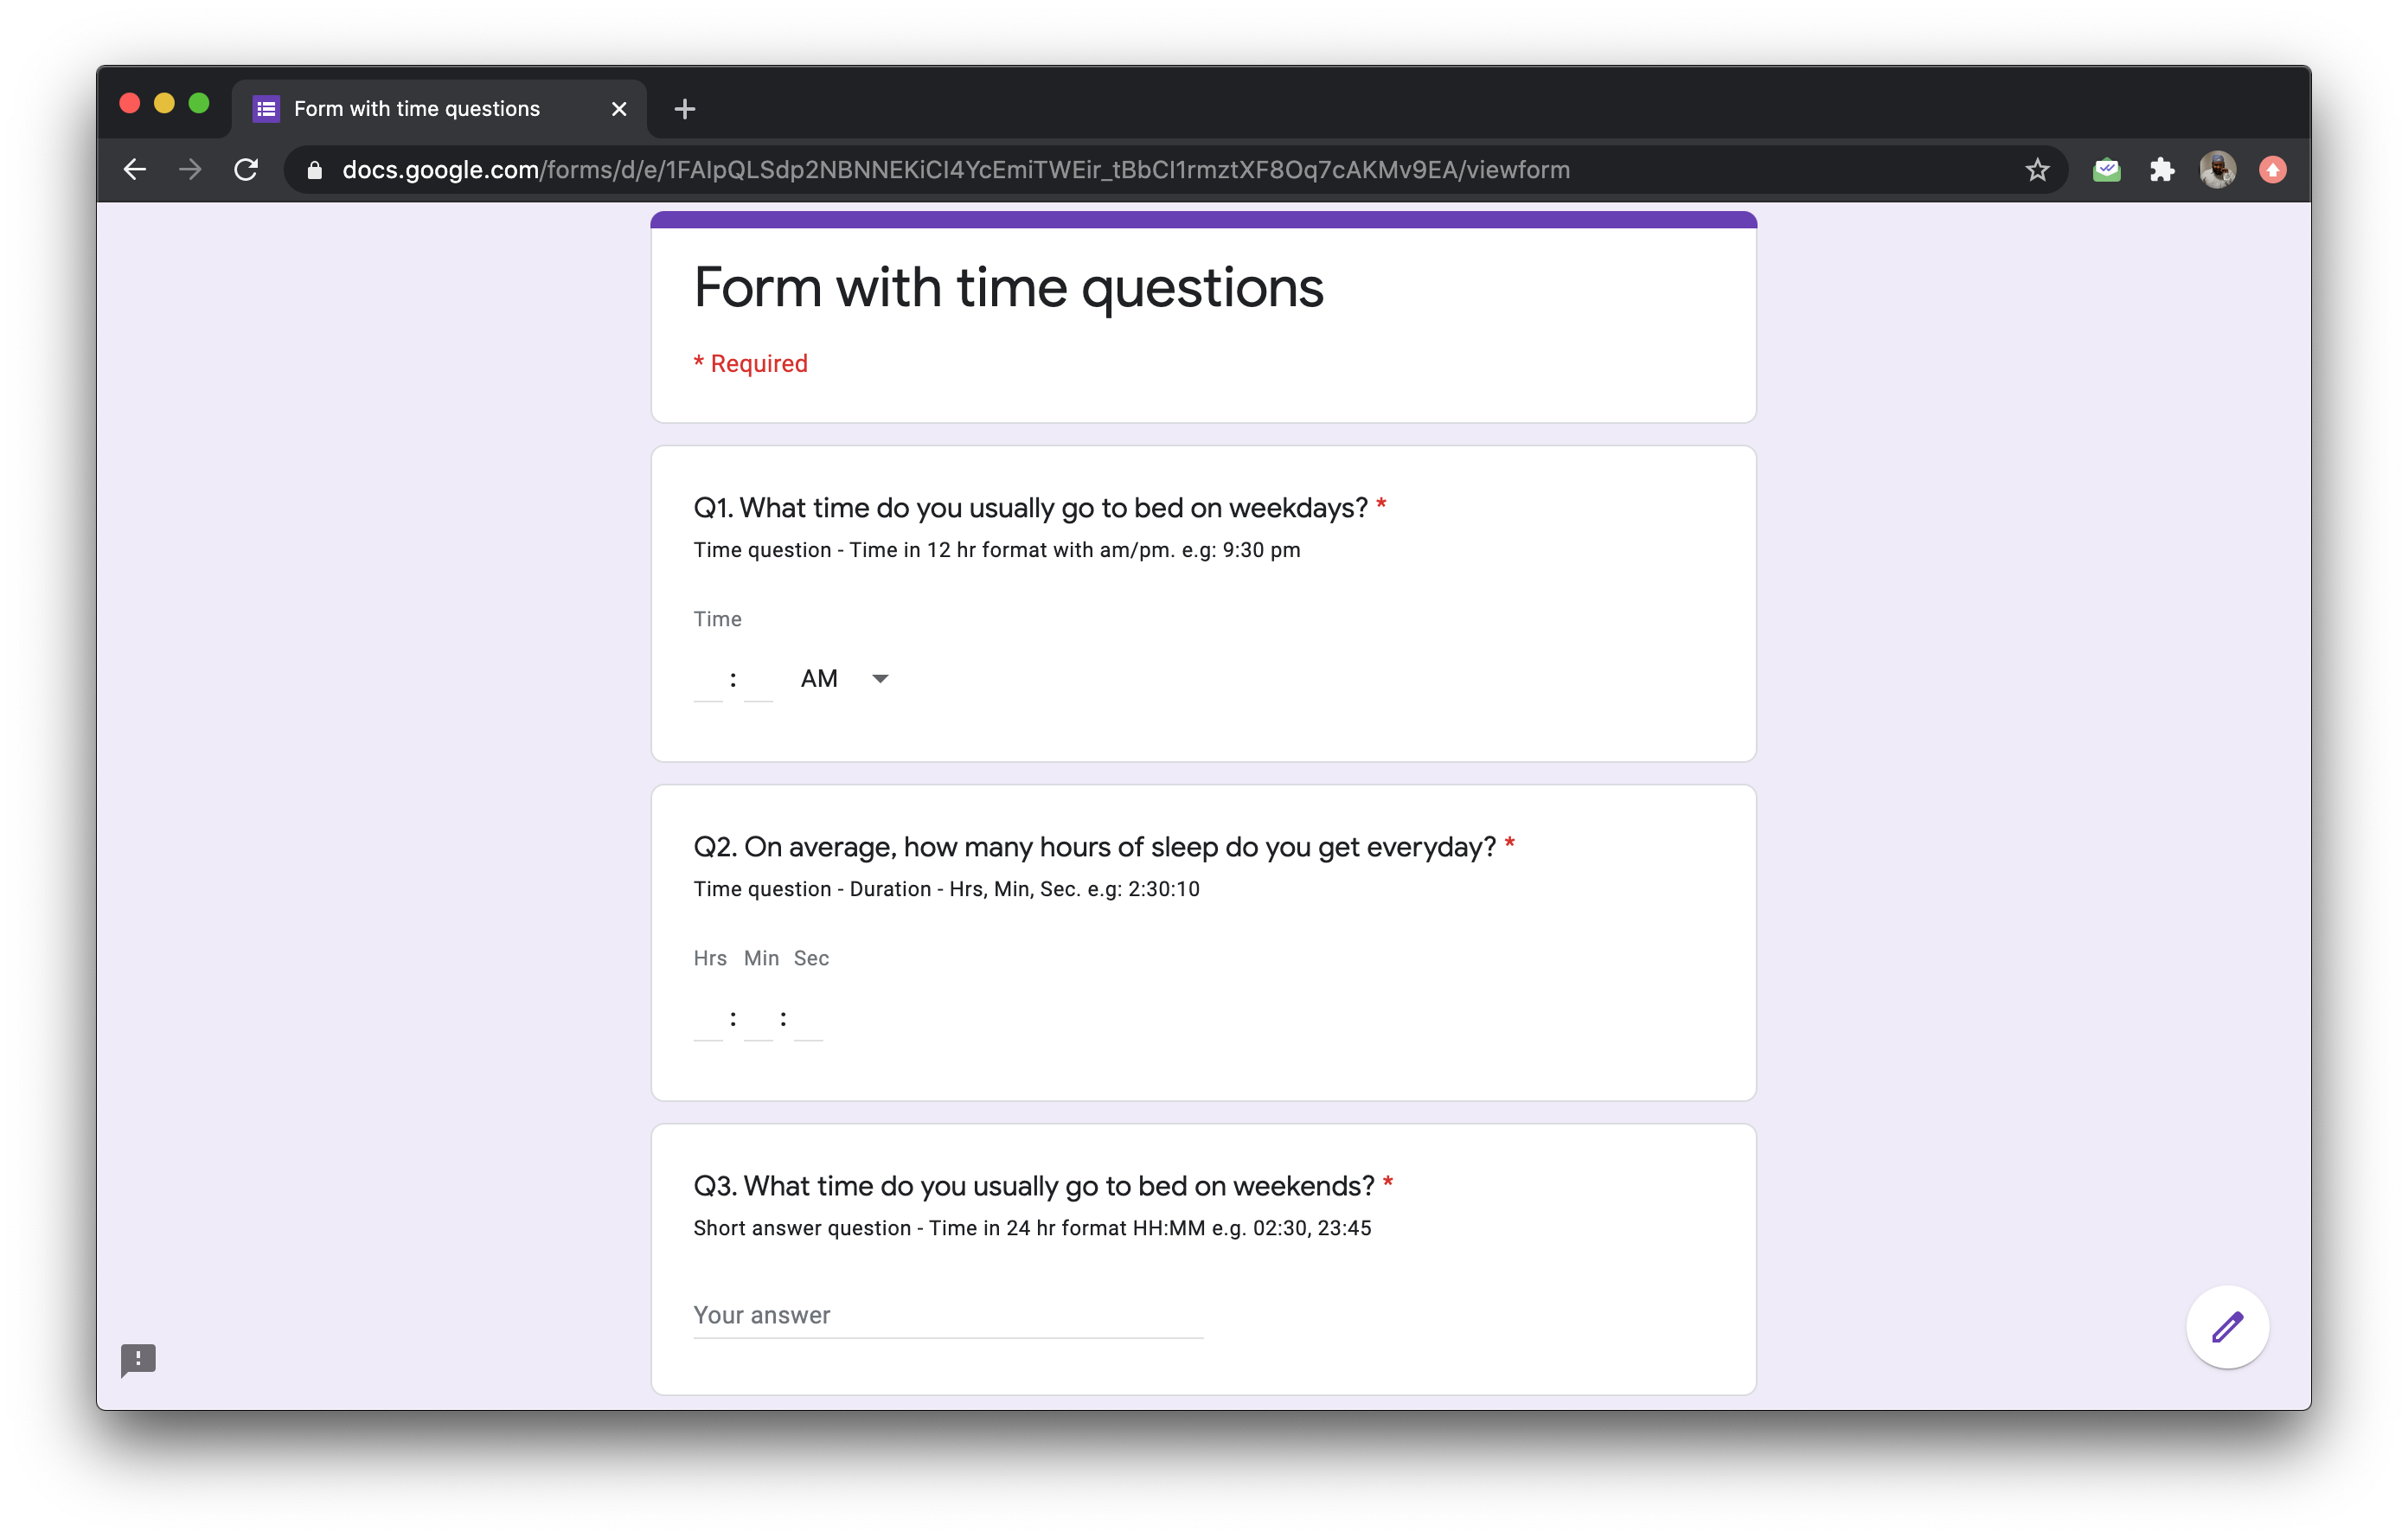 Time question allows users to enter the time in 12 hr am/pm format. You can also let users enter duration [of an activity] in hours, minutes and seconds. 